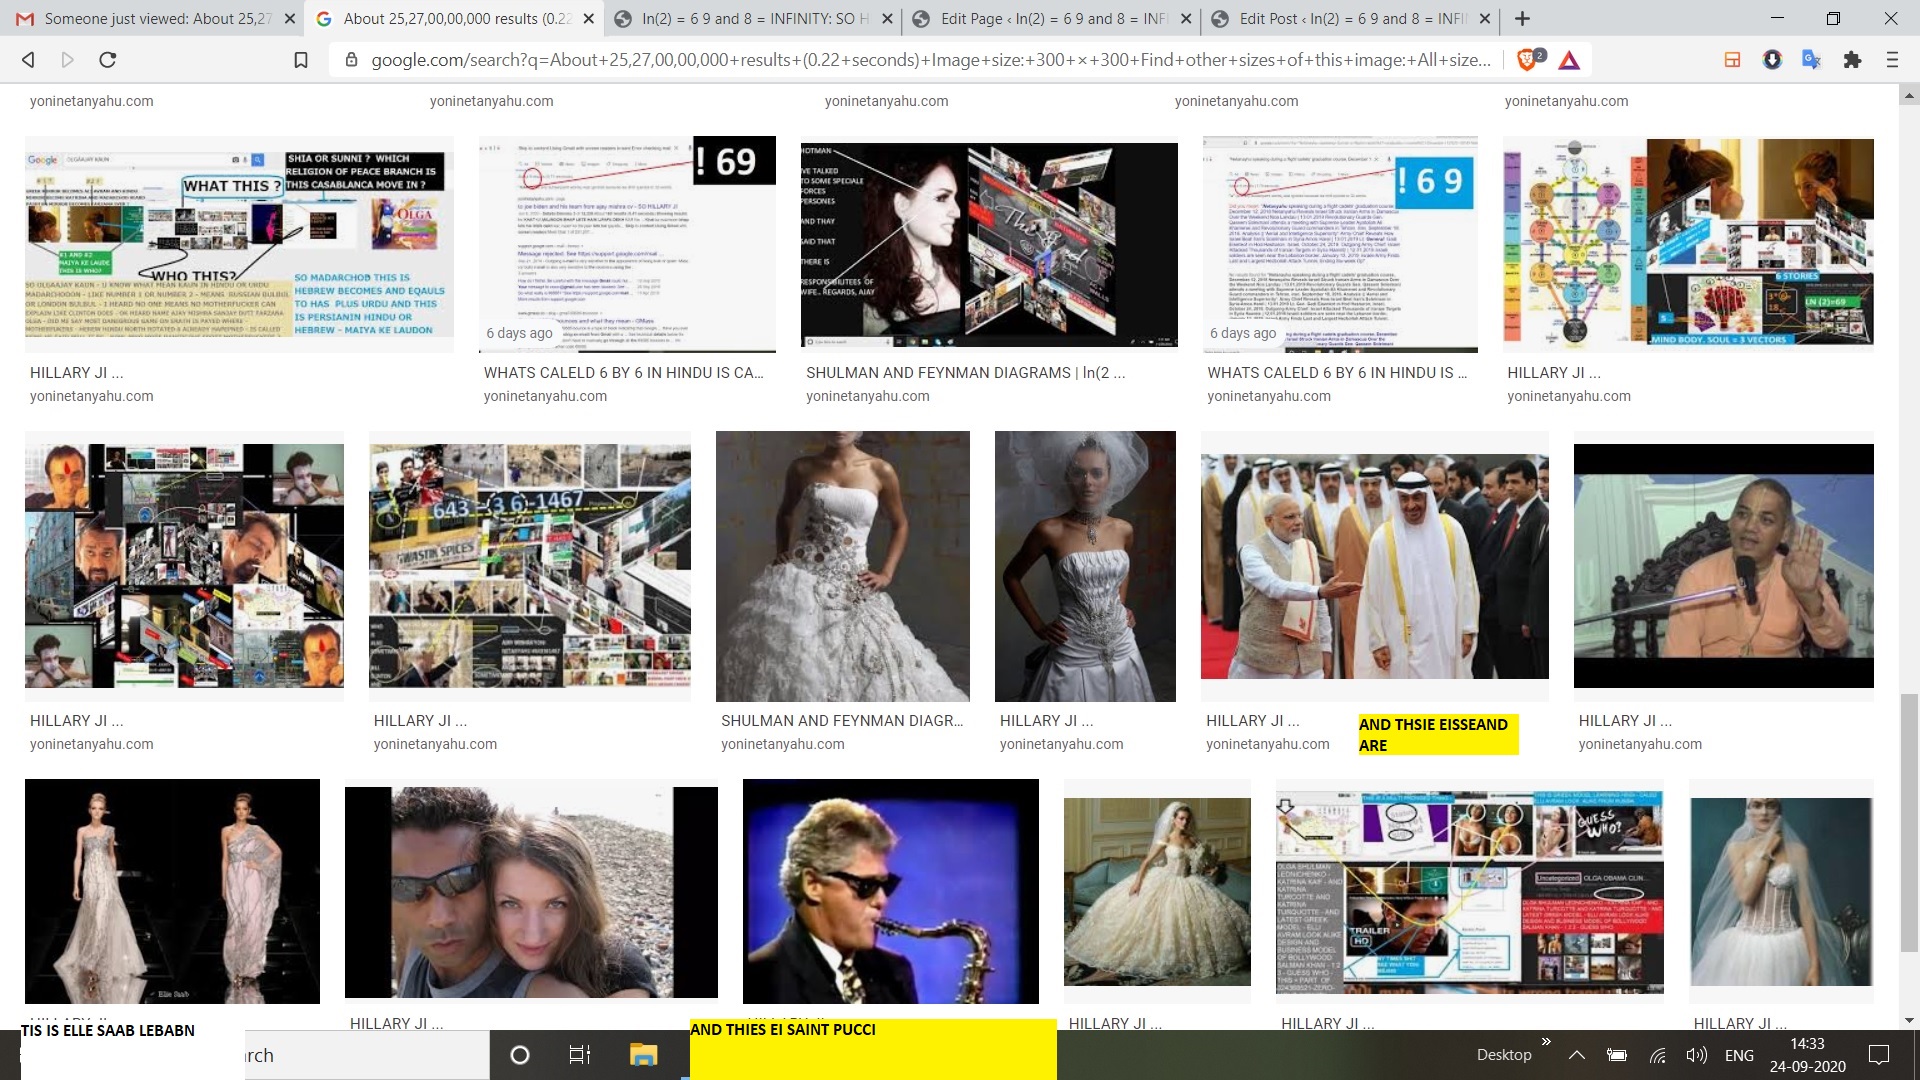 About 25,27,00,00,000 results (0.22 seconds) Image size: 300 × 300 Find other sizes of this image: All sizes - Medium Best guess for this image: olga shulman lednichenko mafia and robots Search Results Visually similar images Image result Image result Report images Pages that include matching images Web results HOTMAN SE ETHEISE – When I took office, only high energy ... yoninetanyahu.com/.../hotman-se-etheise-when-i-took-office-only-high-energy-physi... 640 × 426 - Aug 19, 2018 - ... AND OLGA IS HEAD OF MAFIA AND ROBOTS , THEIESE IS SUCH ... 2018In OLGA SHULMAN LEDNICHENKO AJAY MISHRA YONI ... FROM SANJAY DUTT TO OLGA SHULMAN LEDNICHENKO ... yoninetanyahu.com/.../from-sanjay-dutt-to-olga-shulman-lednichenko-flowers-from-... 562 × 416 - Posted on August 29, 2018 by OLGA SHULMAN LEDNICHENKO AND YONI NETANYAHU BLOG .... OLGA IS HEAD OF MAFIA AND ROBOTS AND WILLIAME ... Someone just viewed: Fwd: Someone just viewed: FROM OLGA yoninetanyahu.com/.../someone-just-viewed-fwd-someone-just-viewed-from-olga-shu... 562 × 374 - Posted on September 1, 2018 by OLGA SHULMAN LEDNICHENKO AND YONI NETANYAHU ..... OLGA IS HEAD OF MAFIA AND ROBOTS AND WILLIAME ... August | 2018 - olga shulman lednichenko and yoni netanyahu yoninetanyahu.com/2018/08/19/ 640 × 426 - Aug 19, 2018 - 10 posts published by OLGA SHULMAN LEDNICHENKO AND YONI ... AND OLGA IS HEAD OF MAFIA AND ROBOTS , THEIESE IS SUCH ... 208 Westhaven | www.picswe.com https://www.picswe.com/pics/208-westhaven-59.html 1024 × 682 - 208 Westhaven - www.picswe.com - we have all pics! , we have all the best pics waiting for you! Page navigation 1 2 Next